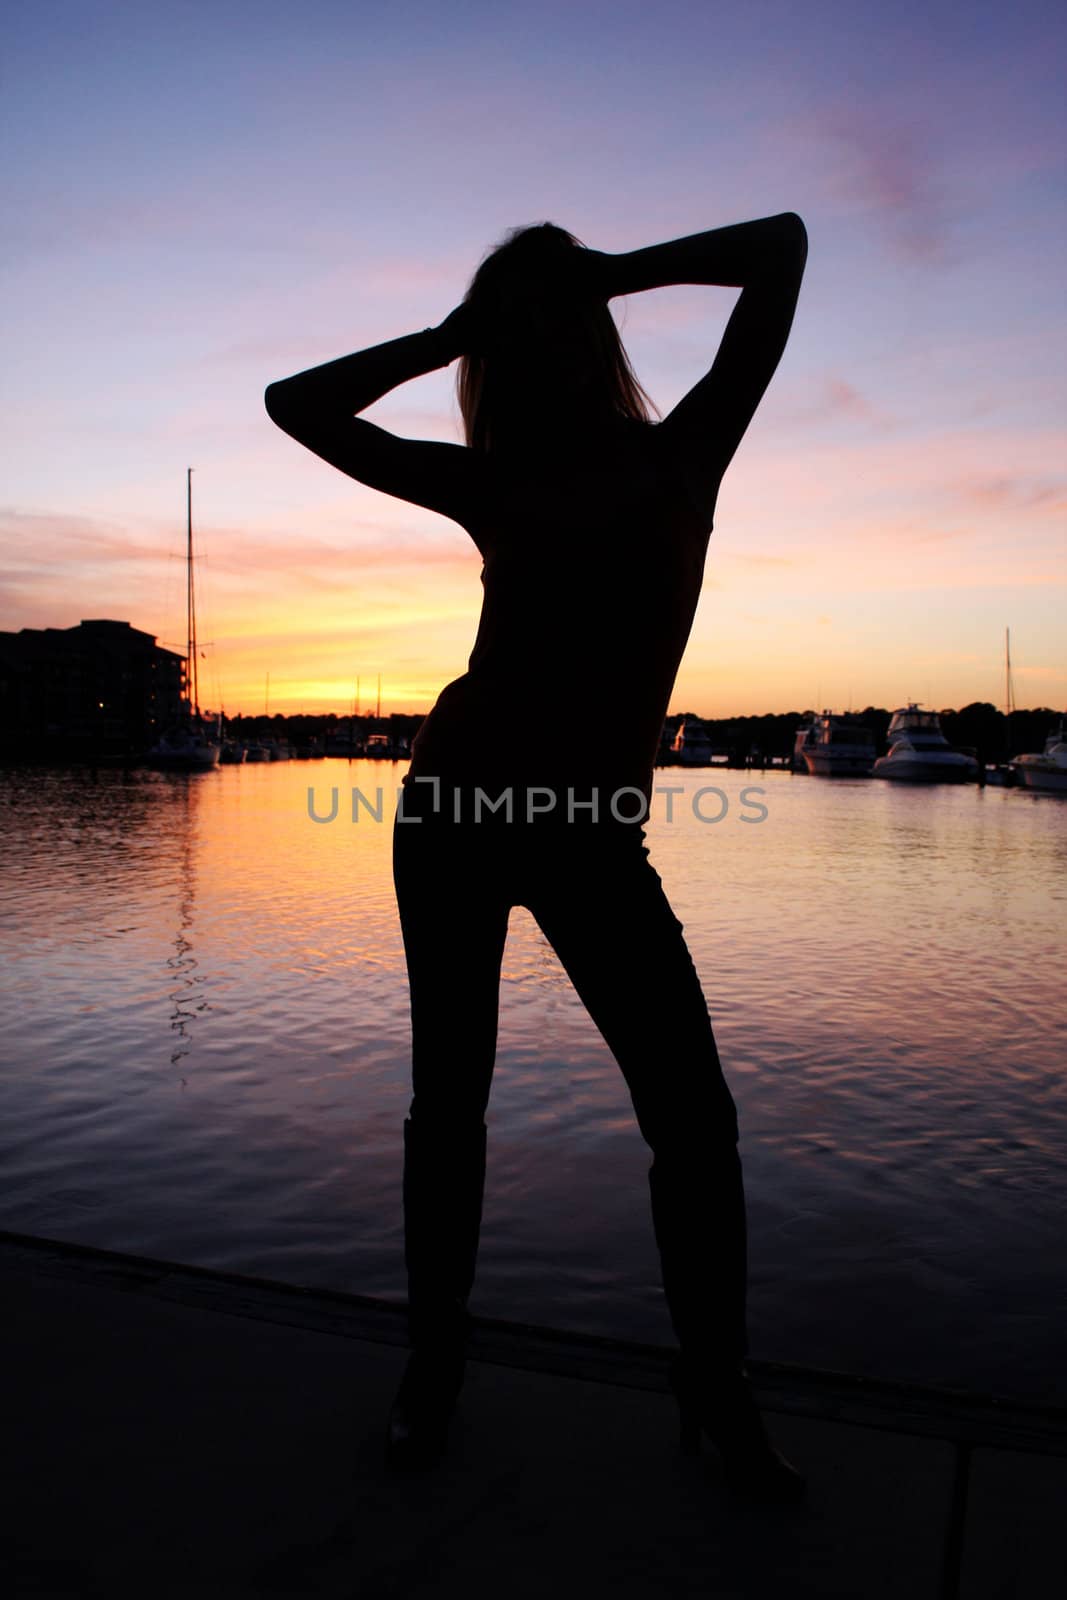 A woman in silhouette during a beautiful sunset